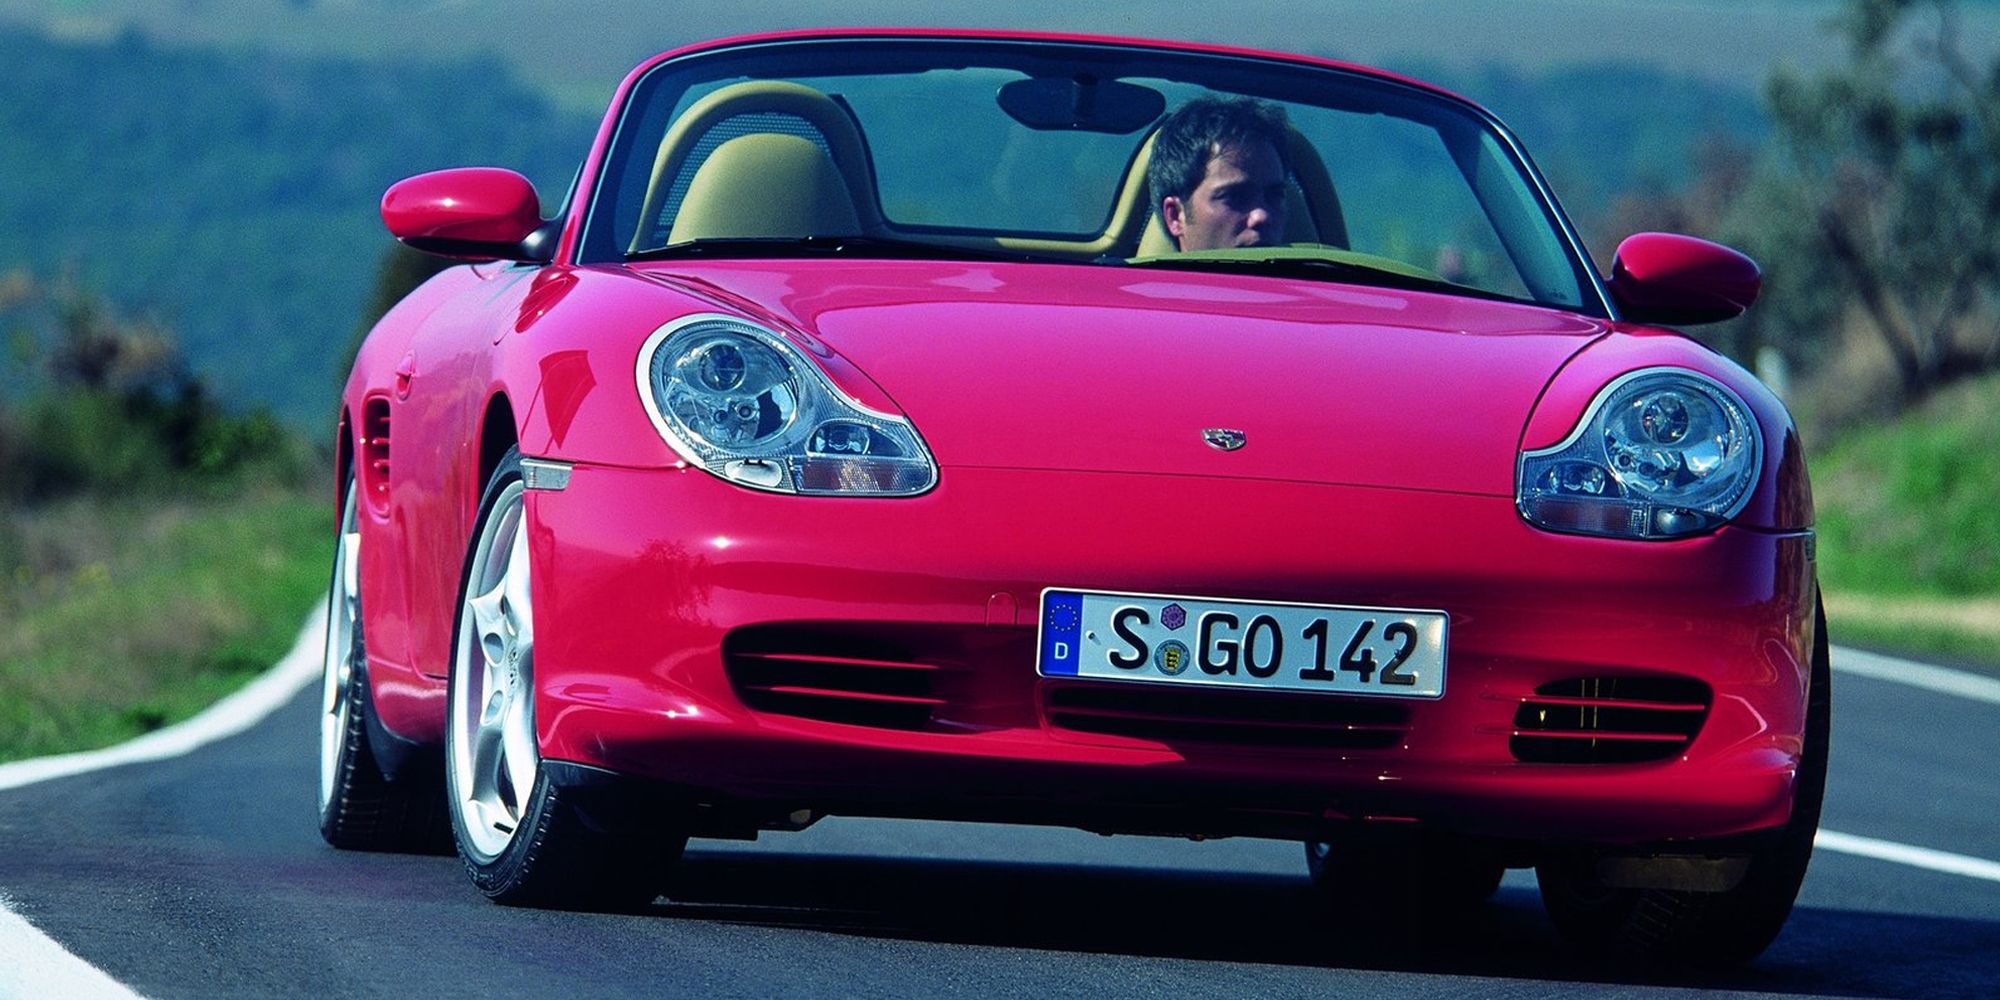 The front of a red Boxster S, top down